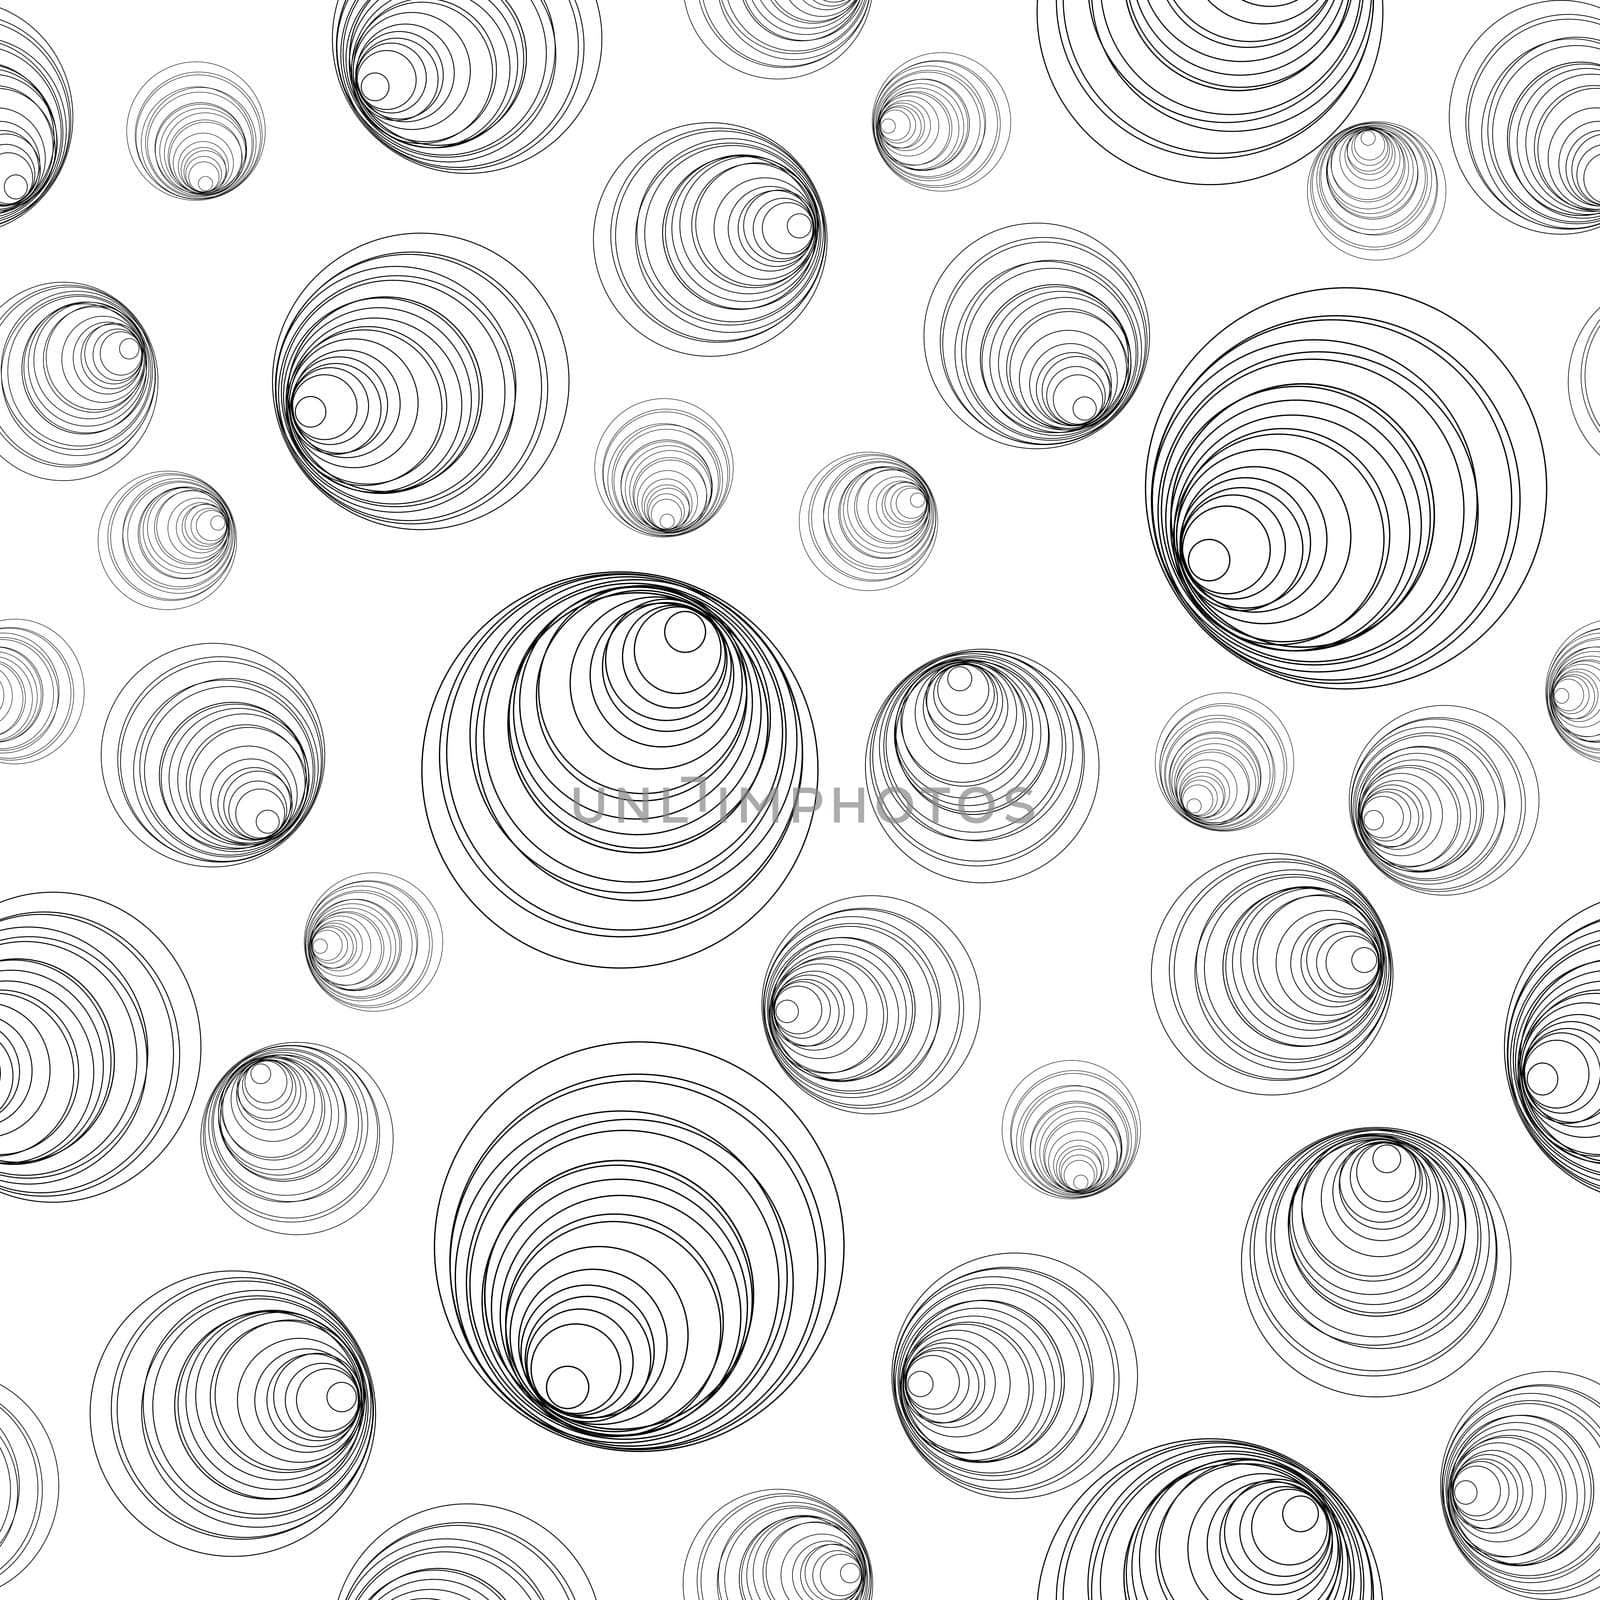 Seamless background with abstract circles